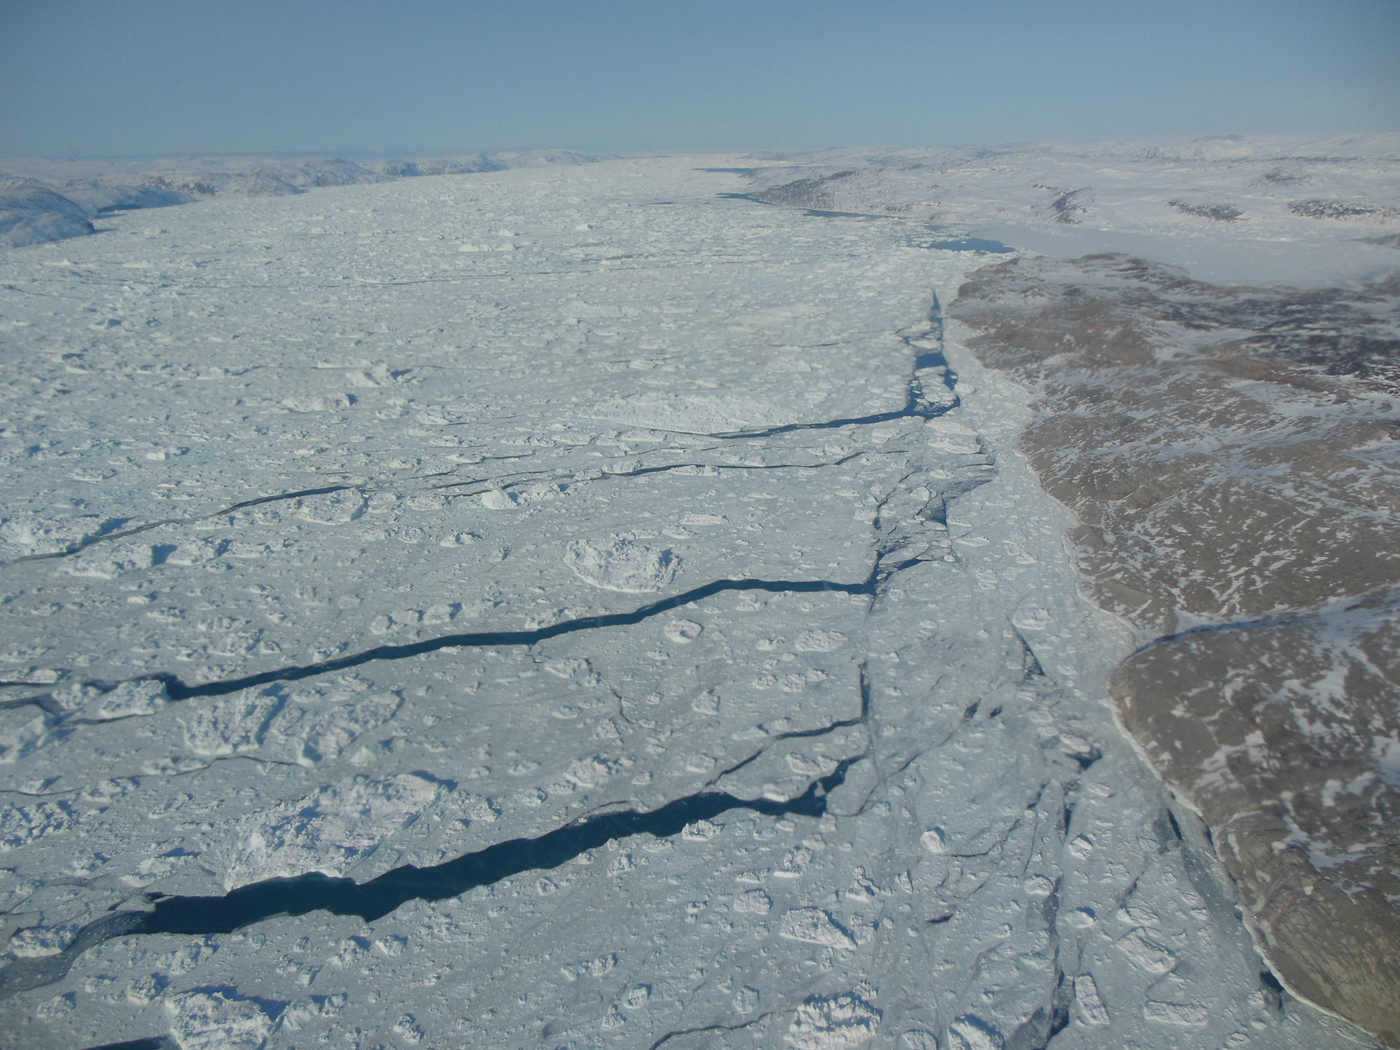 A view of sea ice with open leads of water.